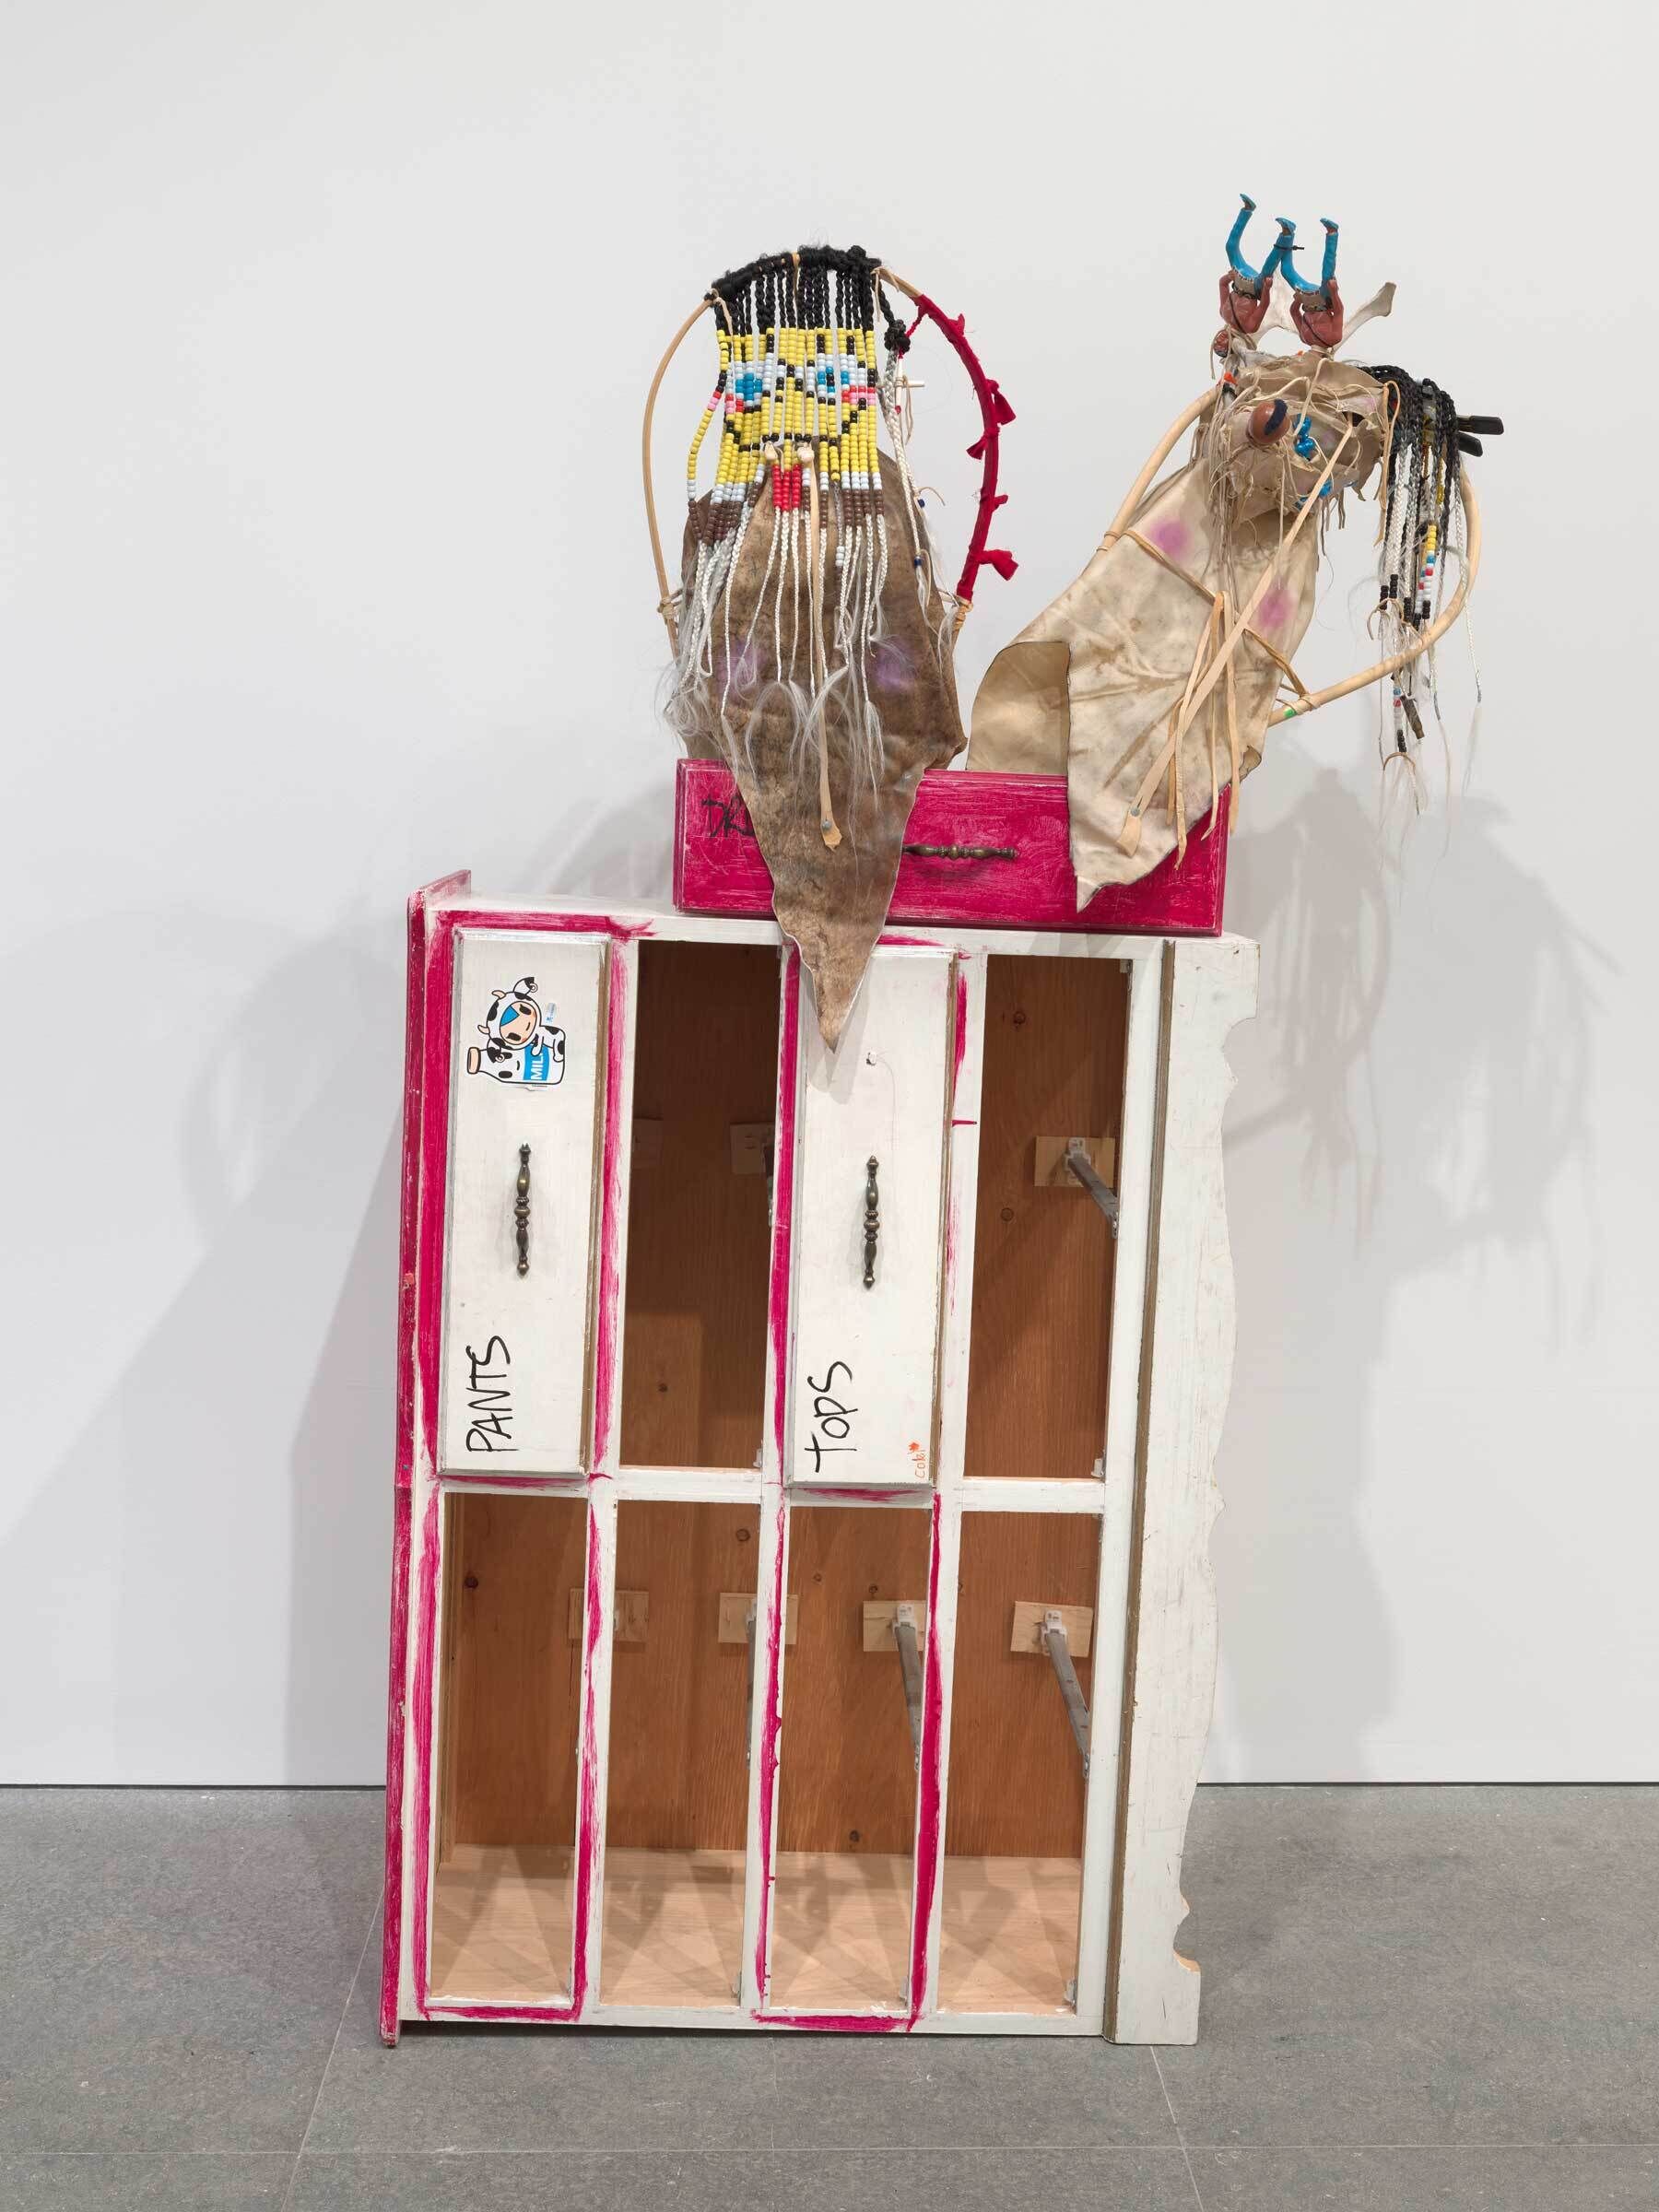 An art installation featuring a wooden wardrobe with colorful, abstracted figures on top, labeled "PANTS" and "TOPS."